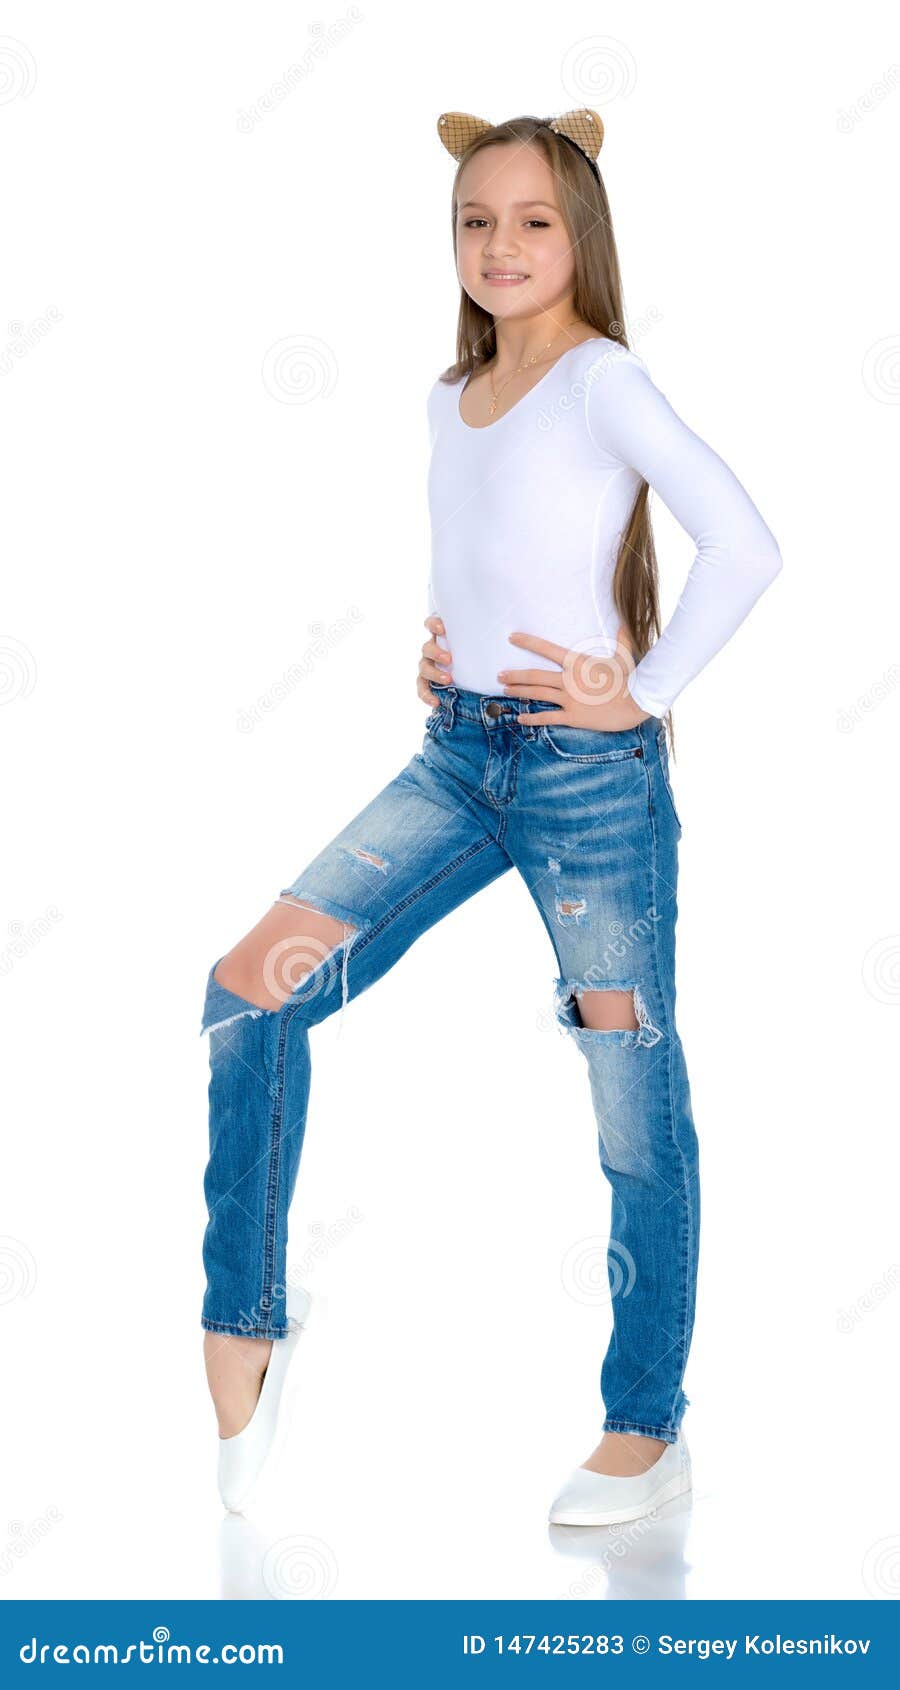 Teen In Jeans Pics